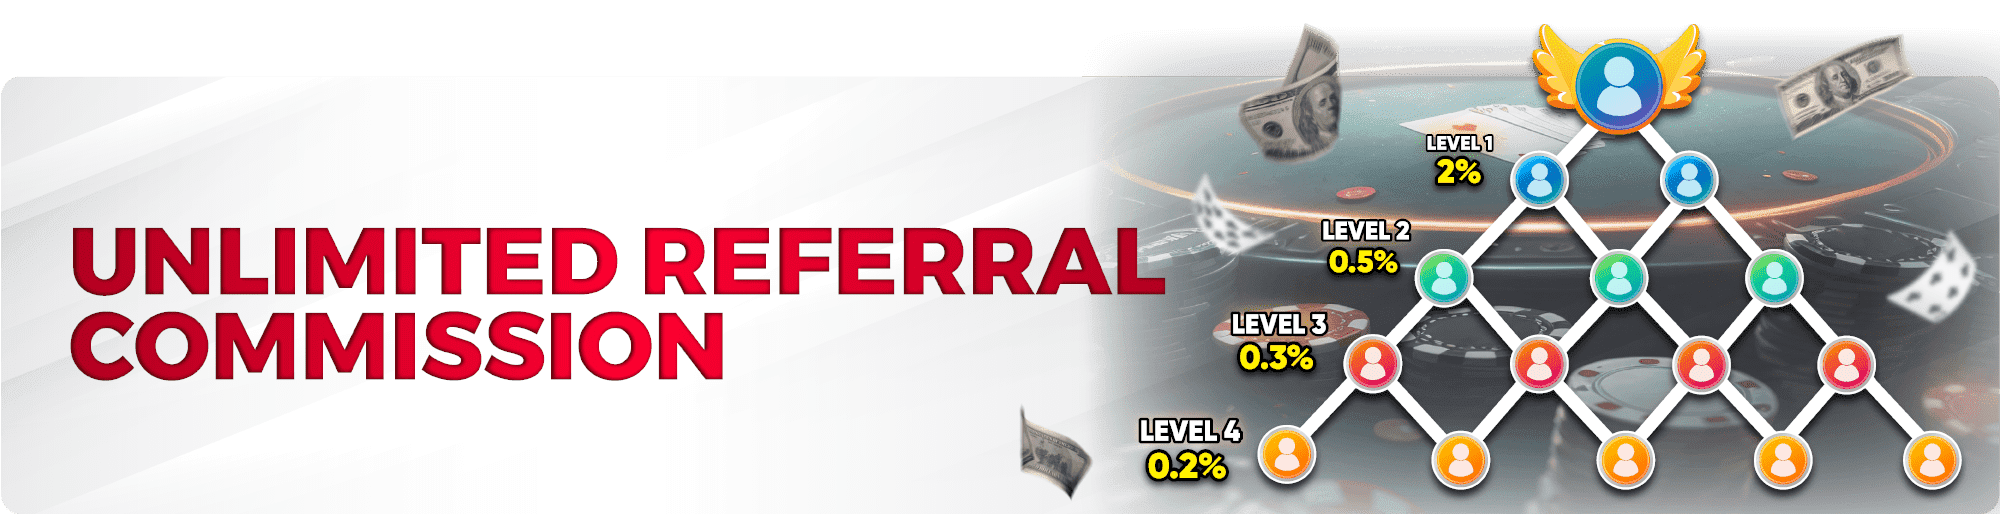 referral unlimited